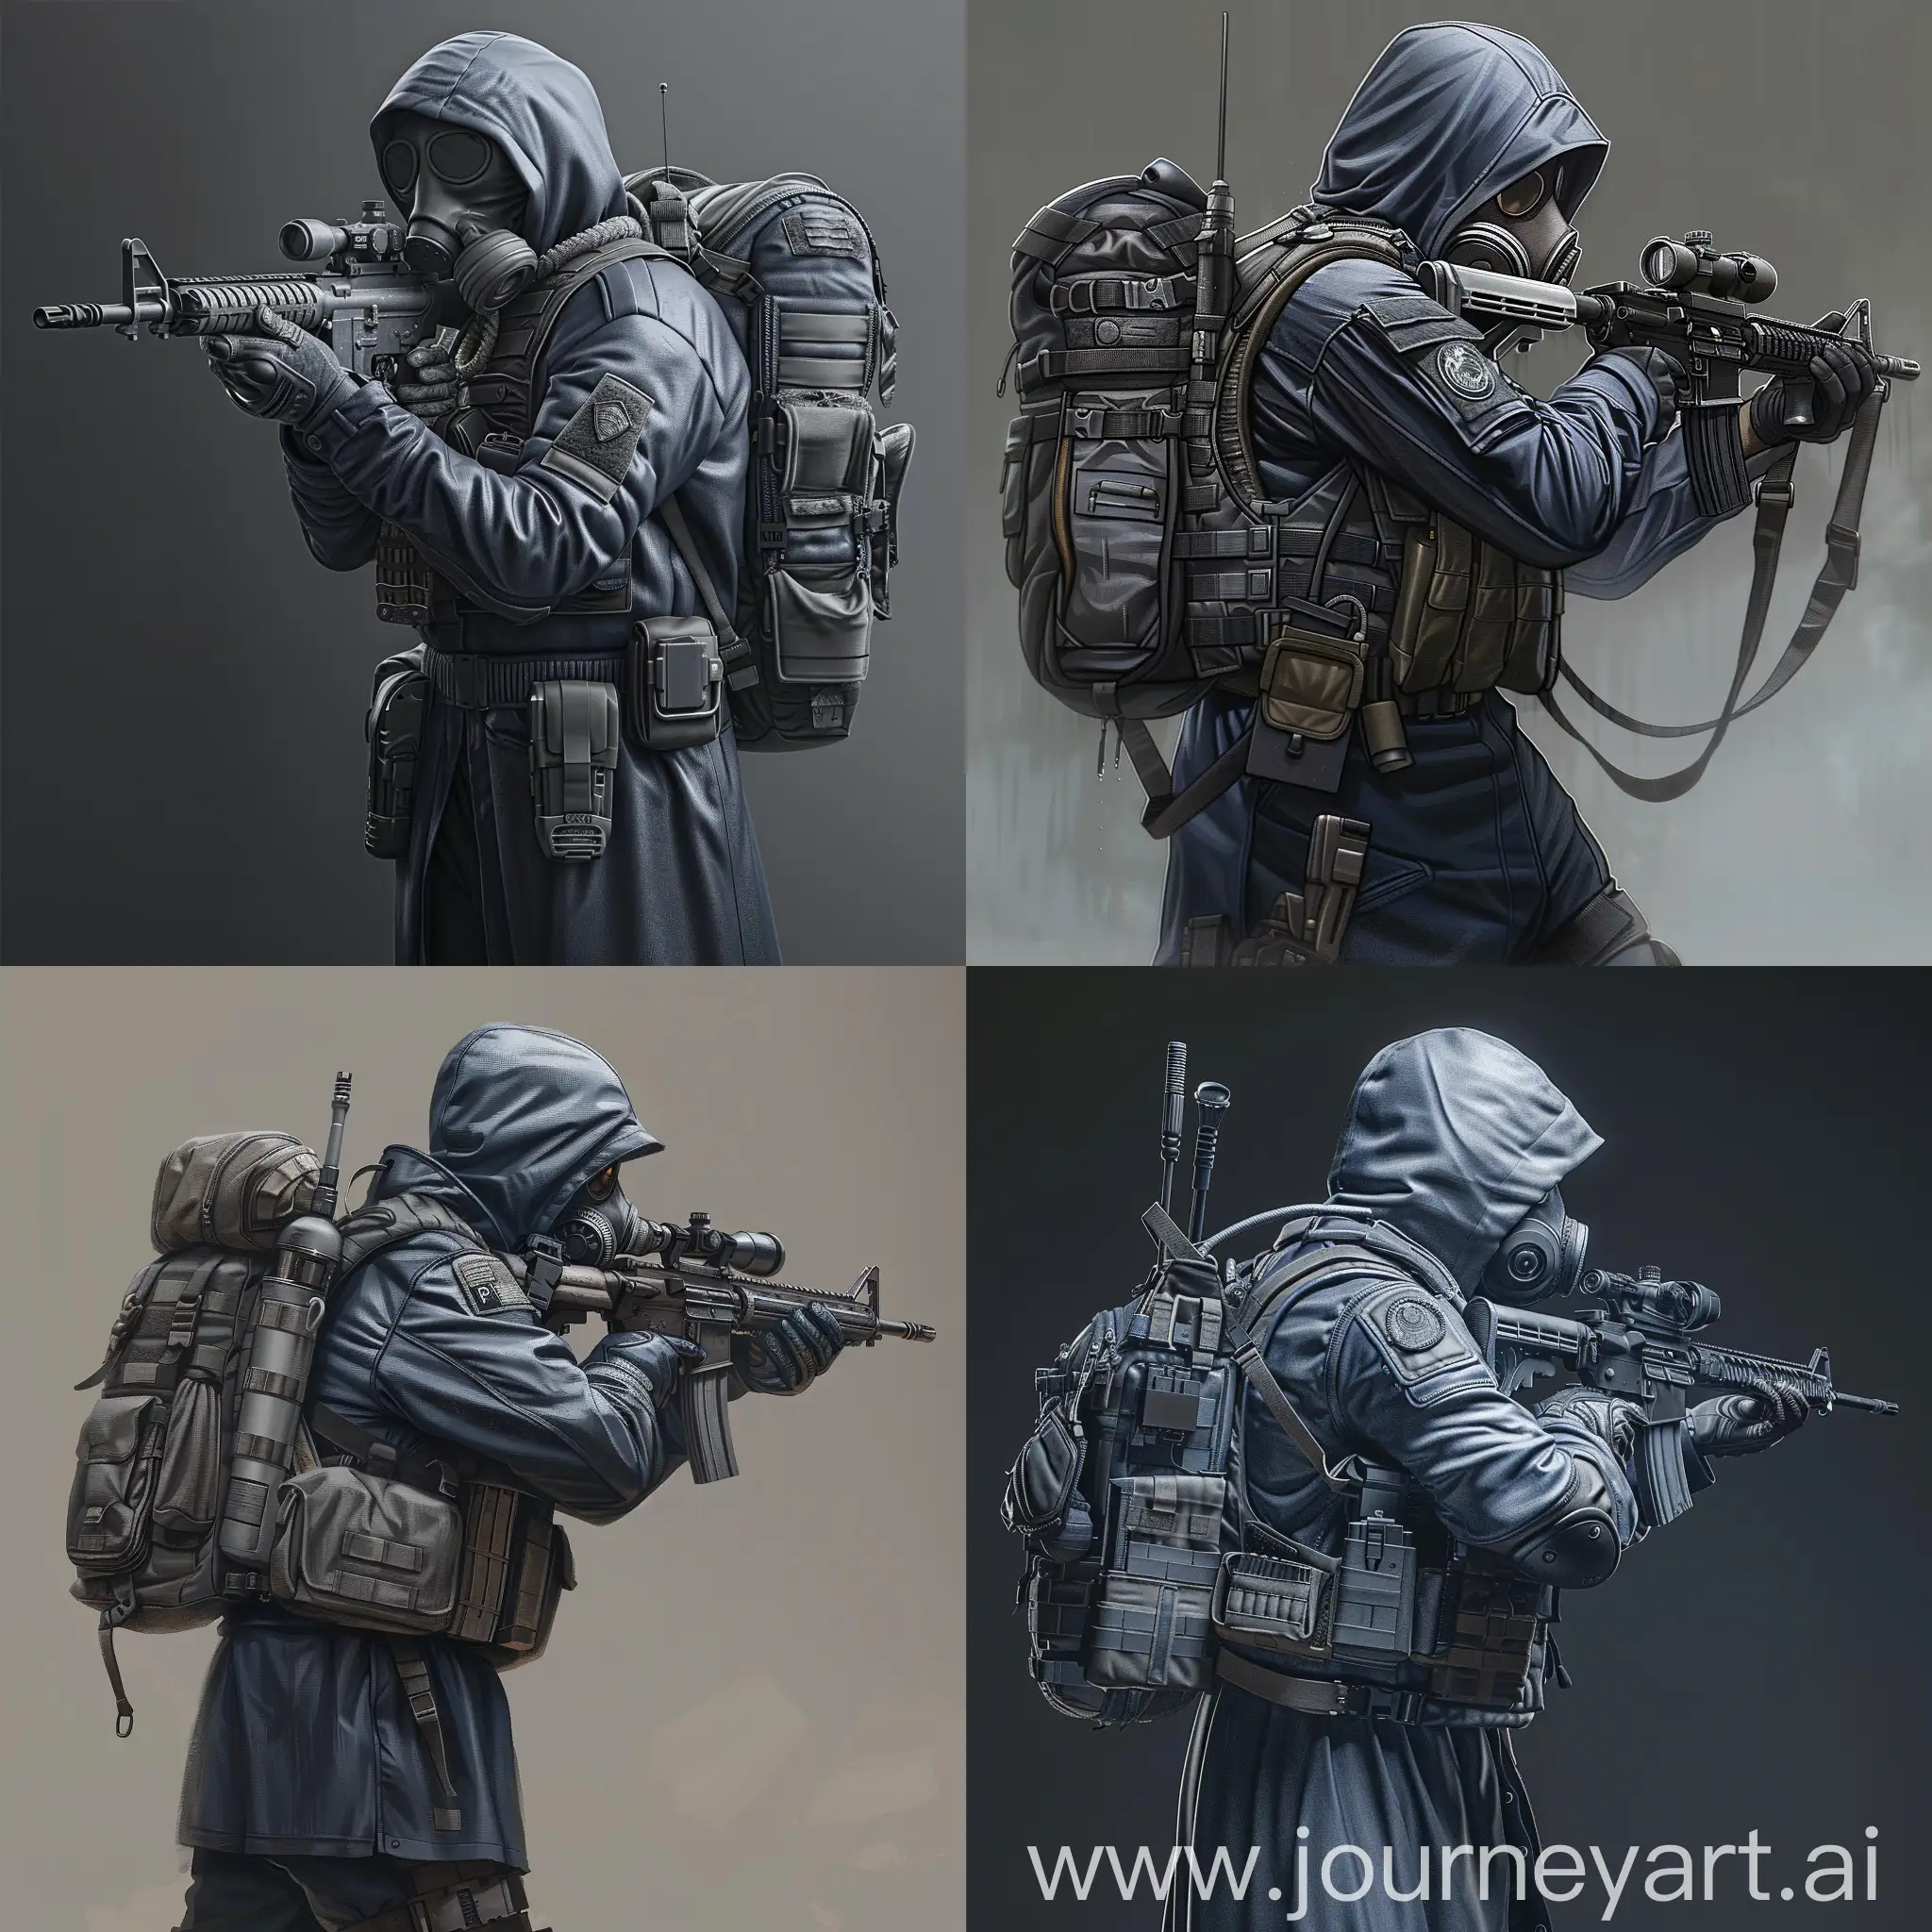 Digital design character, a mercenary from the universe of S.T.A.L.K.E.R., dressed in a dark blue military raincoat, gray military armor on his body, a gasmask on his face, a military backpack on his back, a rifle in his hands, ready to shoot.